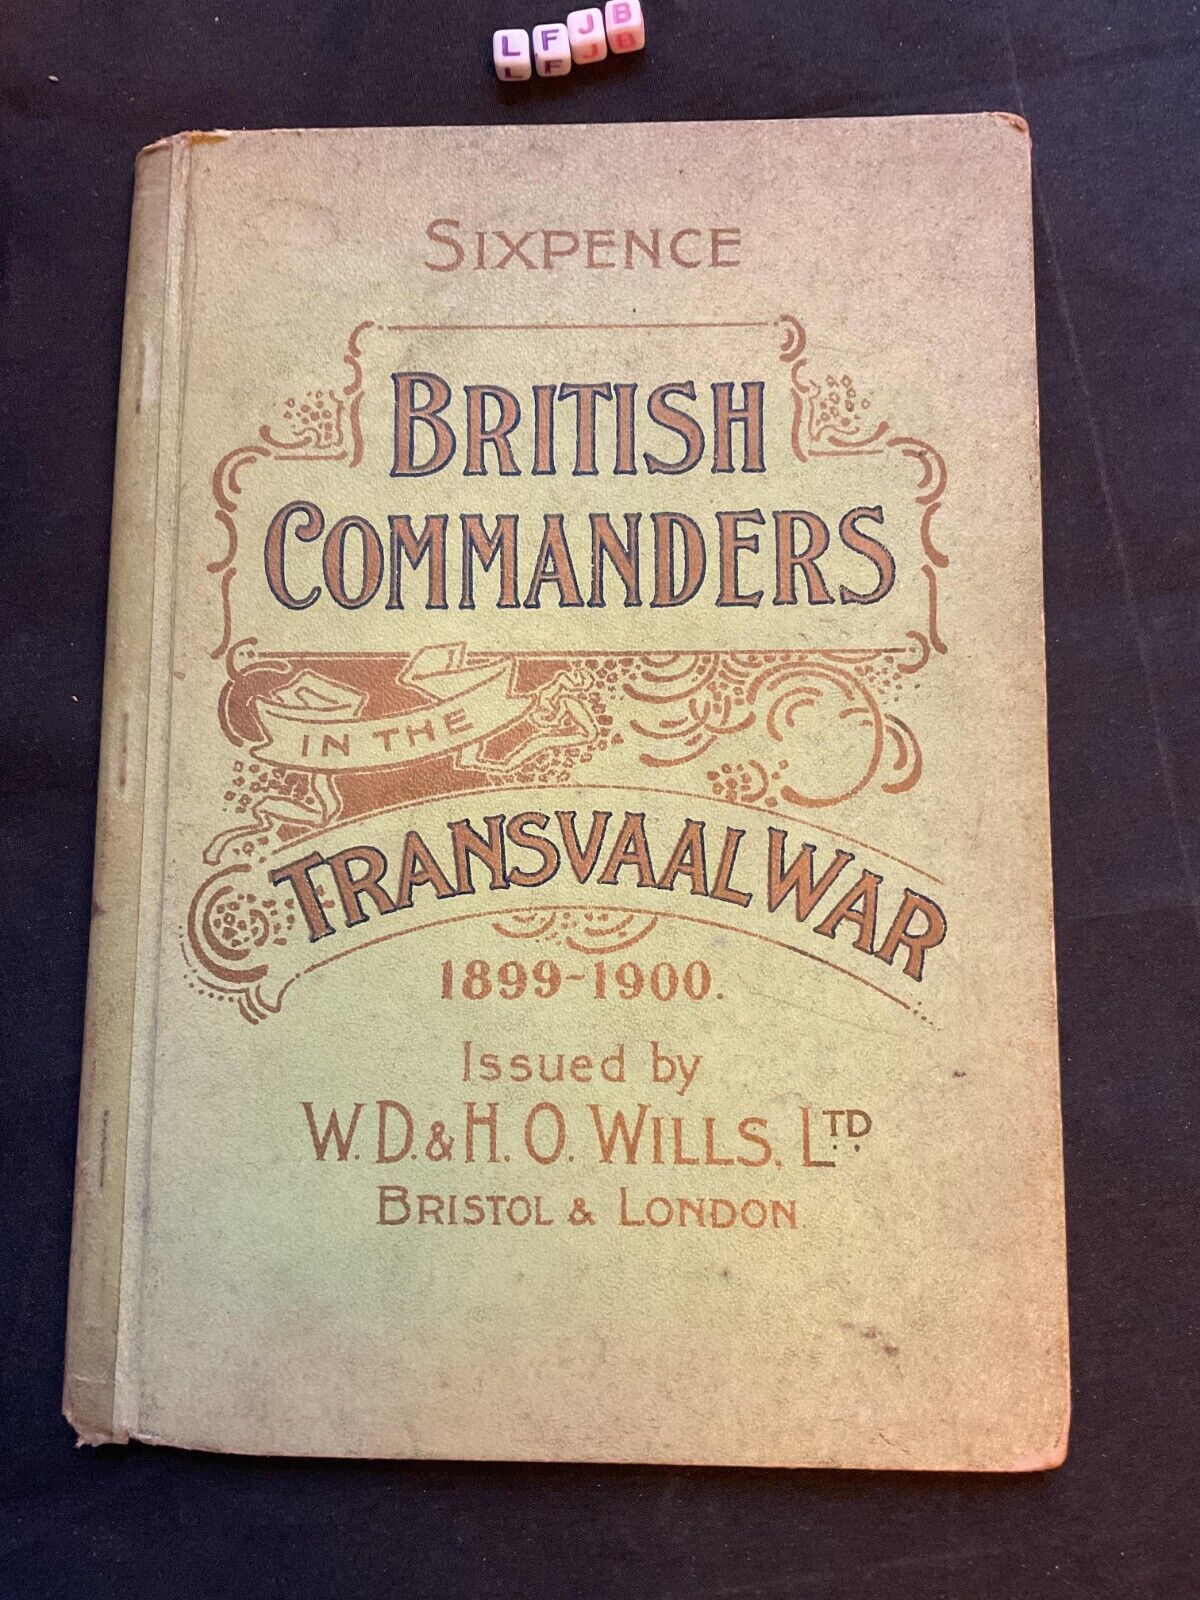 Antique British Commanders Of The Transvaal War 1899-1900 Wd Wills First Edition